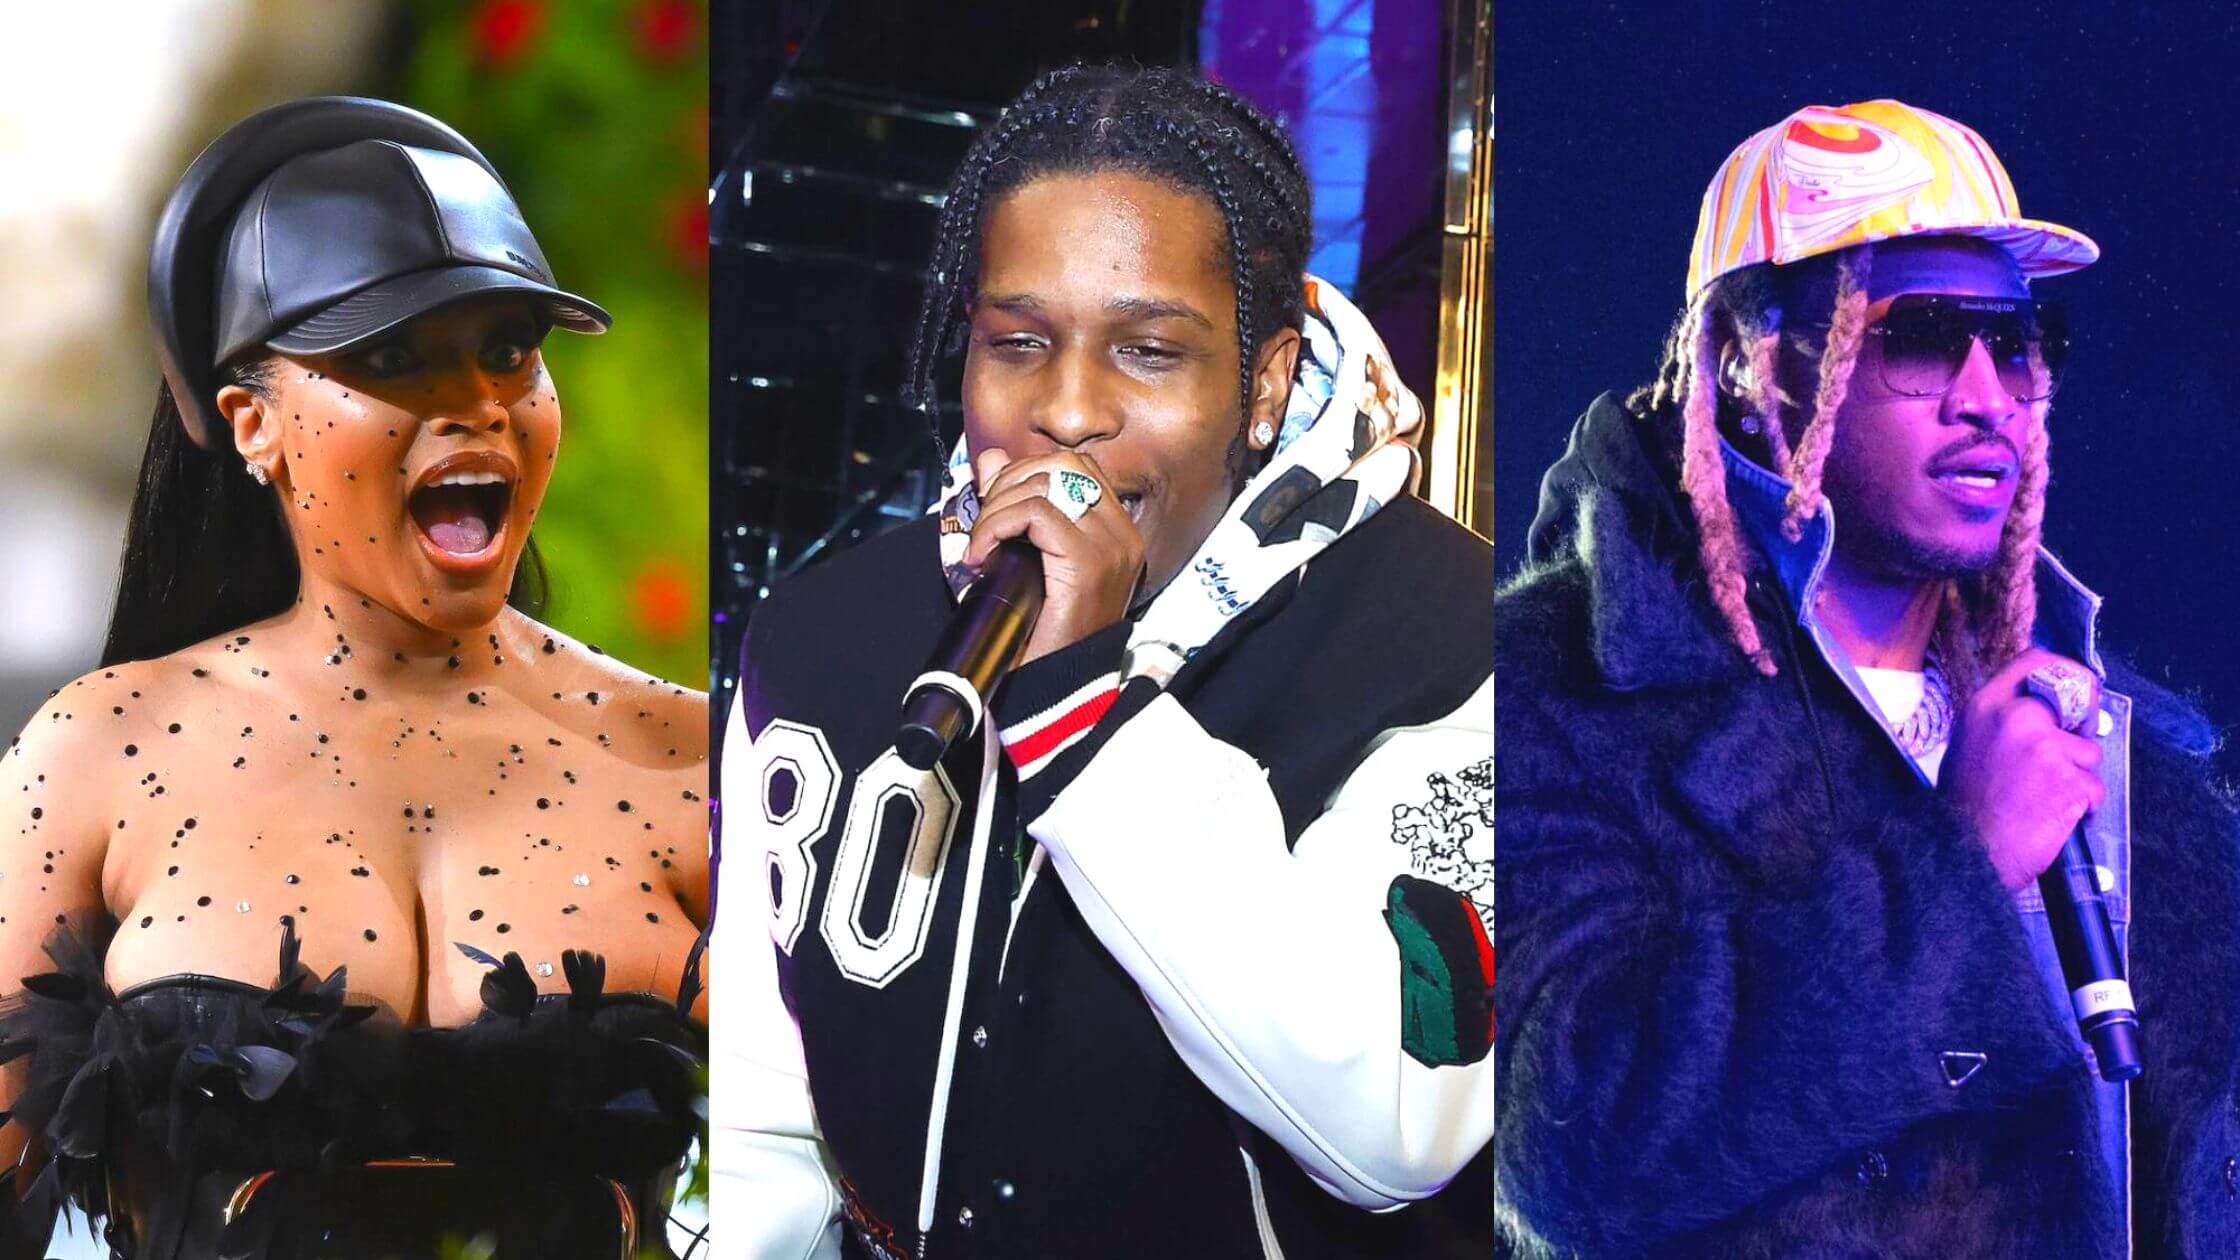 Headlines For Next Rolling Loud NYC 2022, Dominated By Rappers A$ap Rocky, Future And Nicki Minaj
